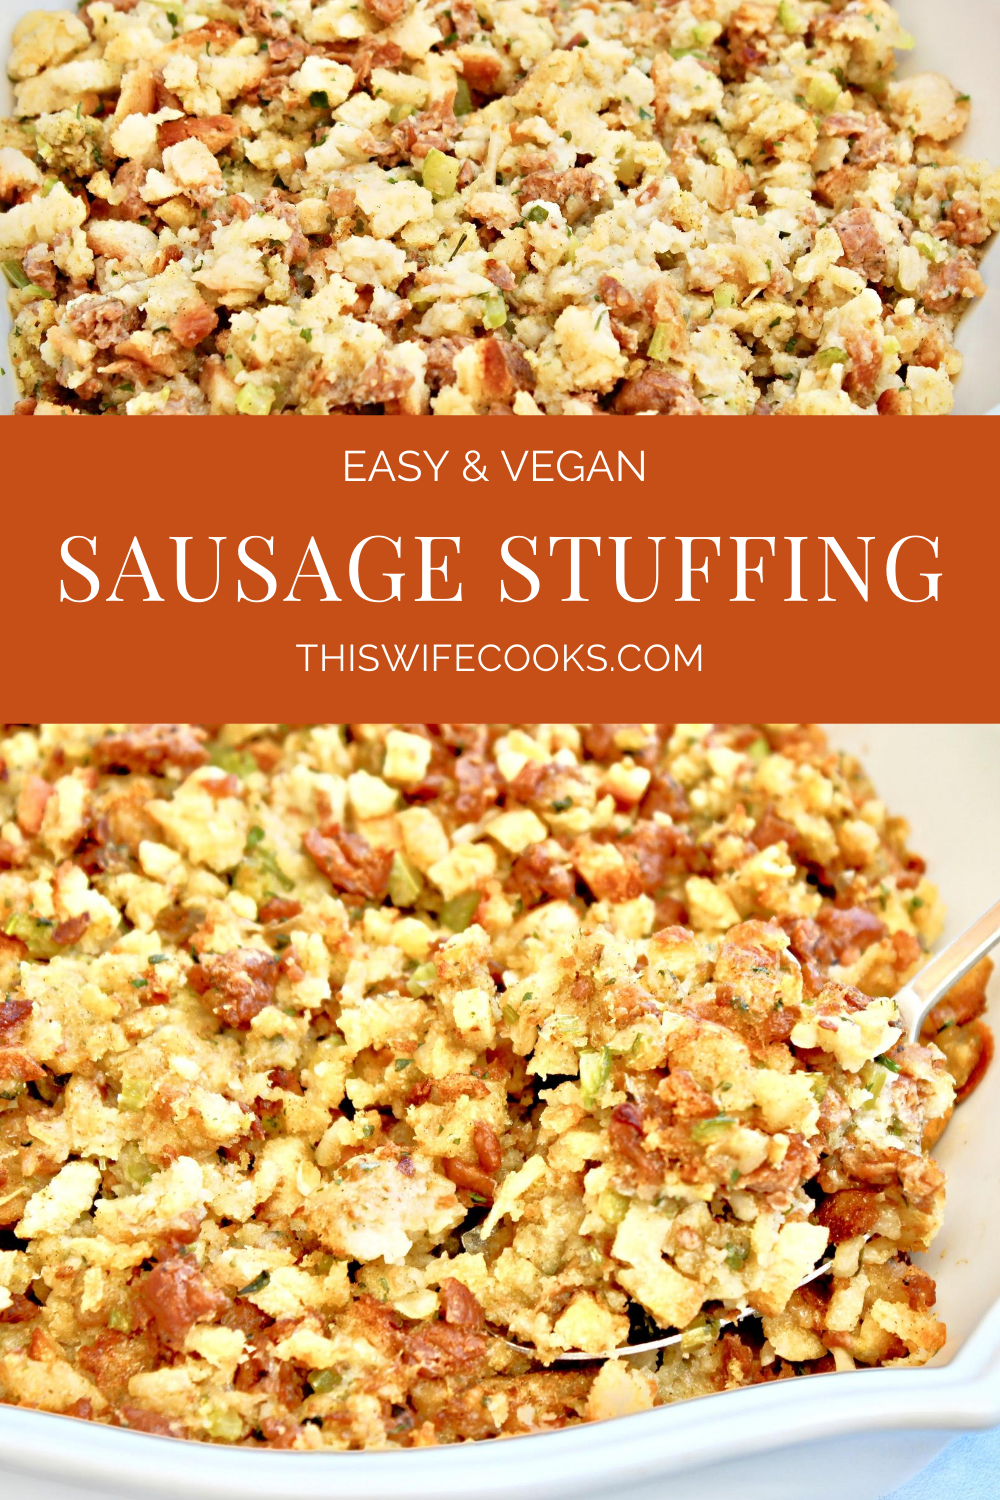 Vegan Sausage Stuffing ~ Dress up store-bought stuffing mix with fresh veggies and plant-based sausage. Ready to serve in 30 minutes! via @thiswifecooks